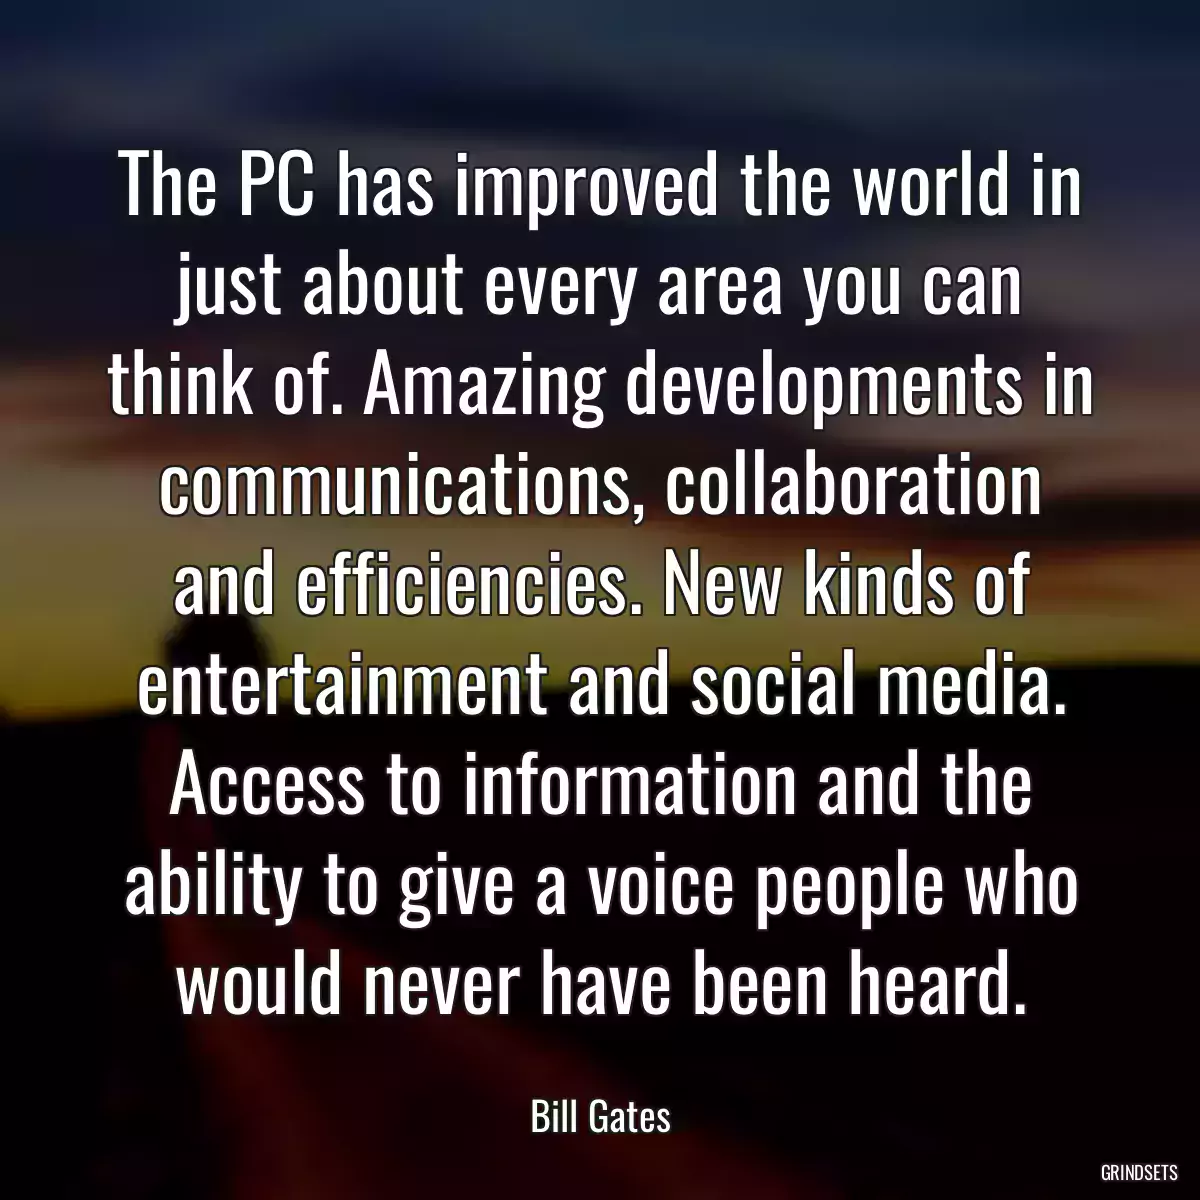 The PC has improved the world in just about every area you can think of. Amazing developments in communications, collaboration and efficiencies. New kinds of entertainment and social media. Access to information and the ability to give a voice people who would never have been heard.